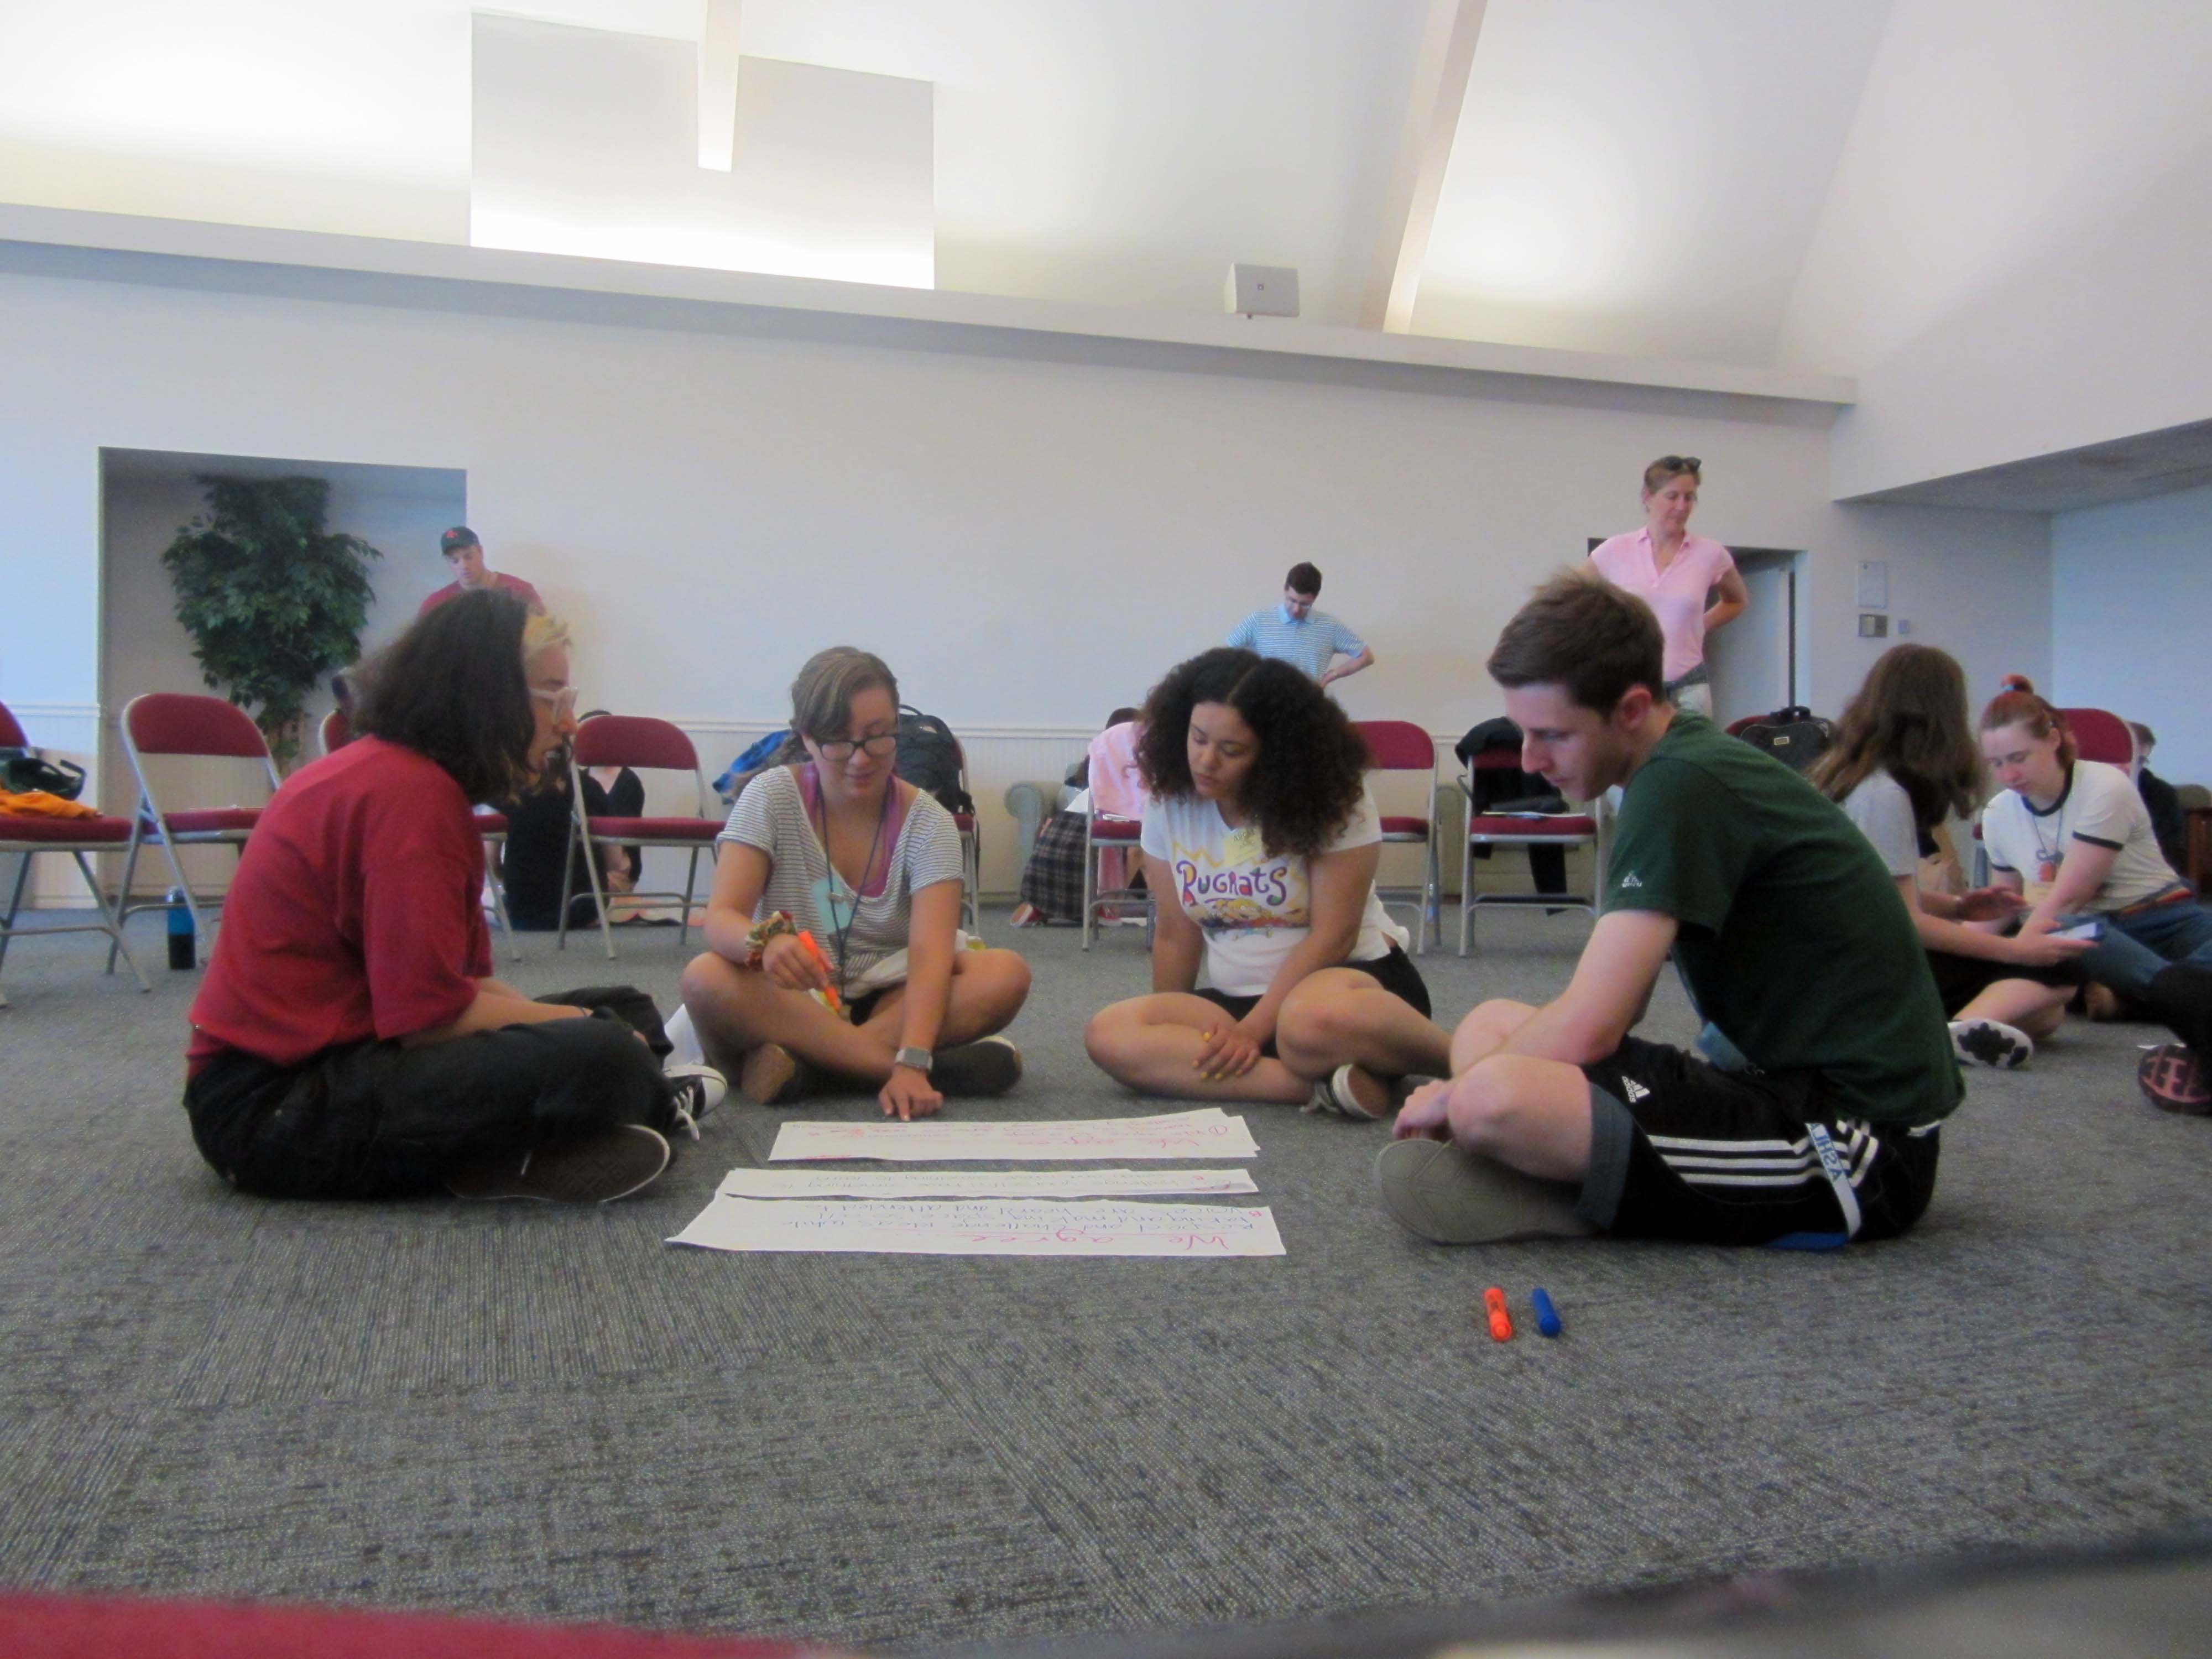 MAT students sitting on the floor working on a group activity.